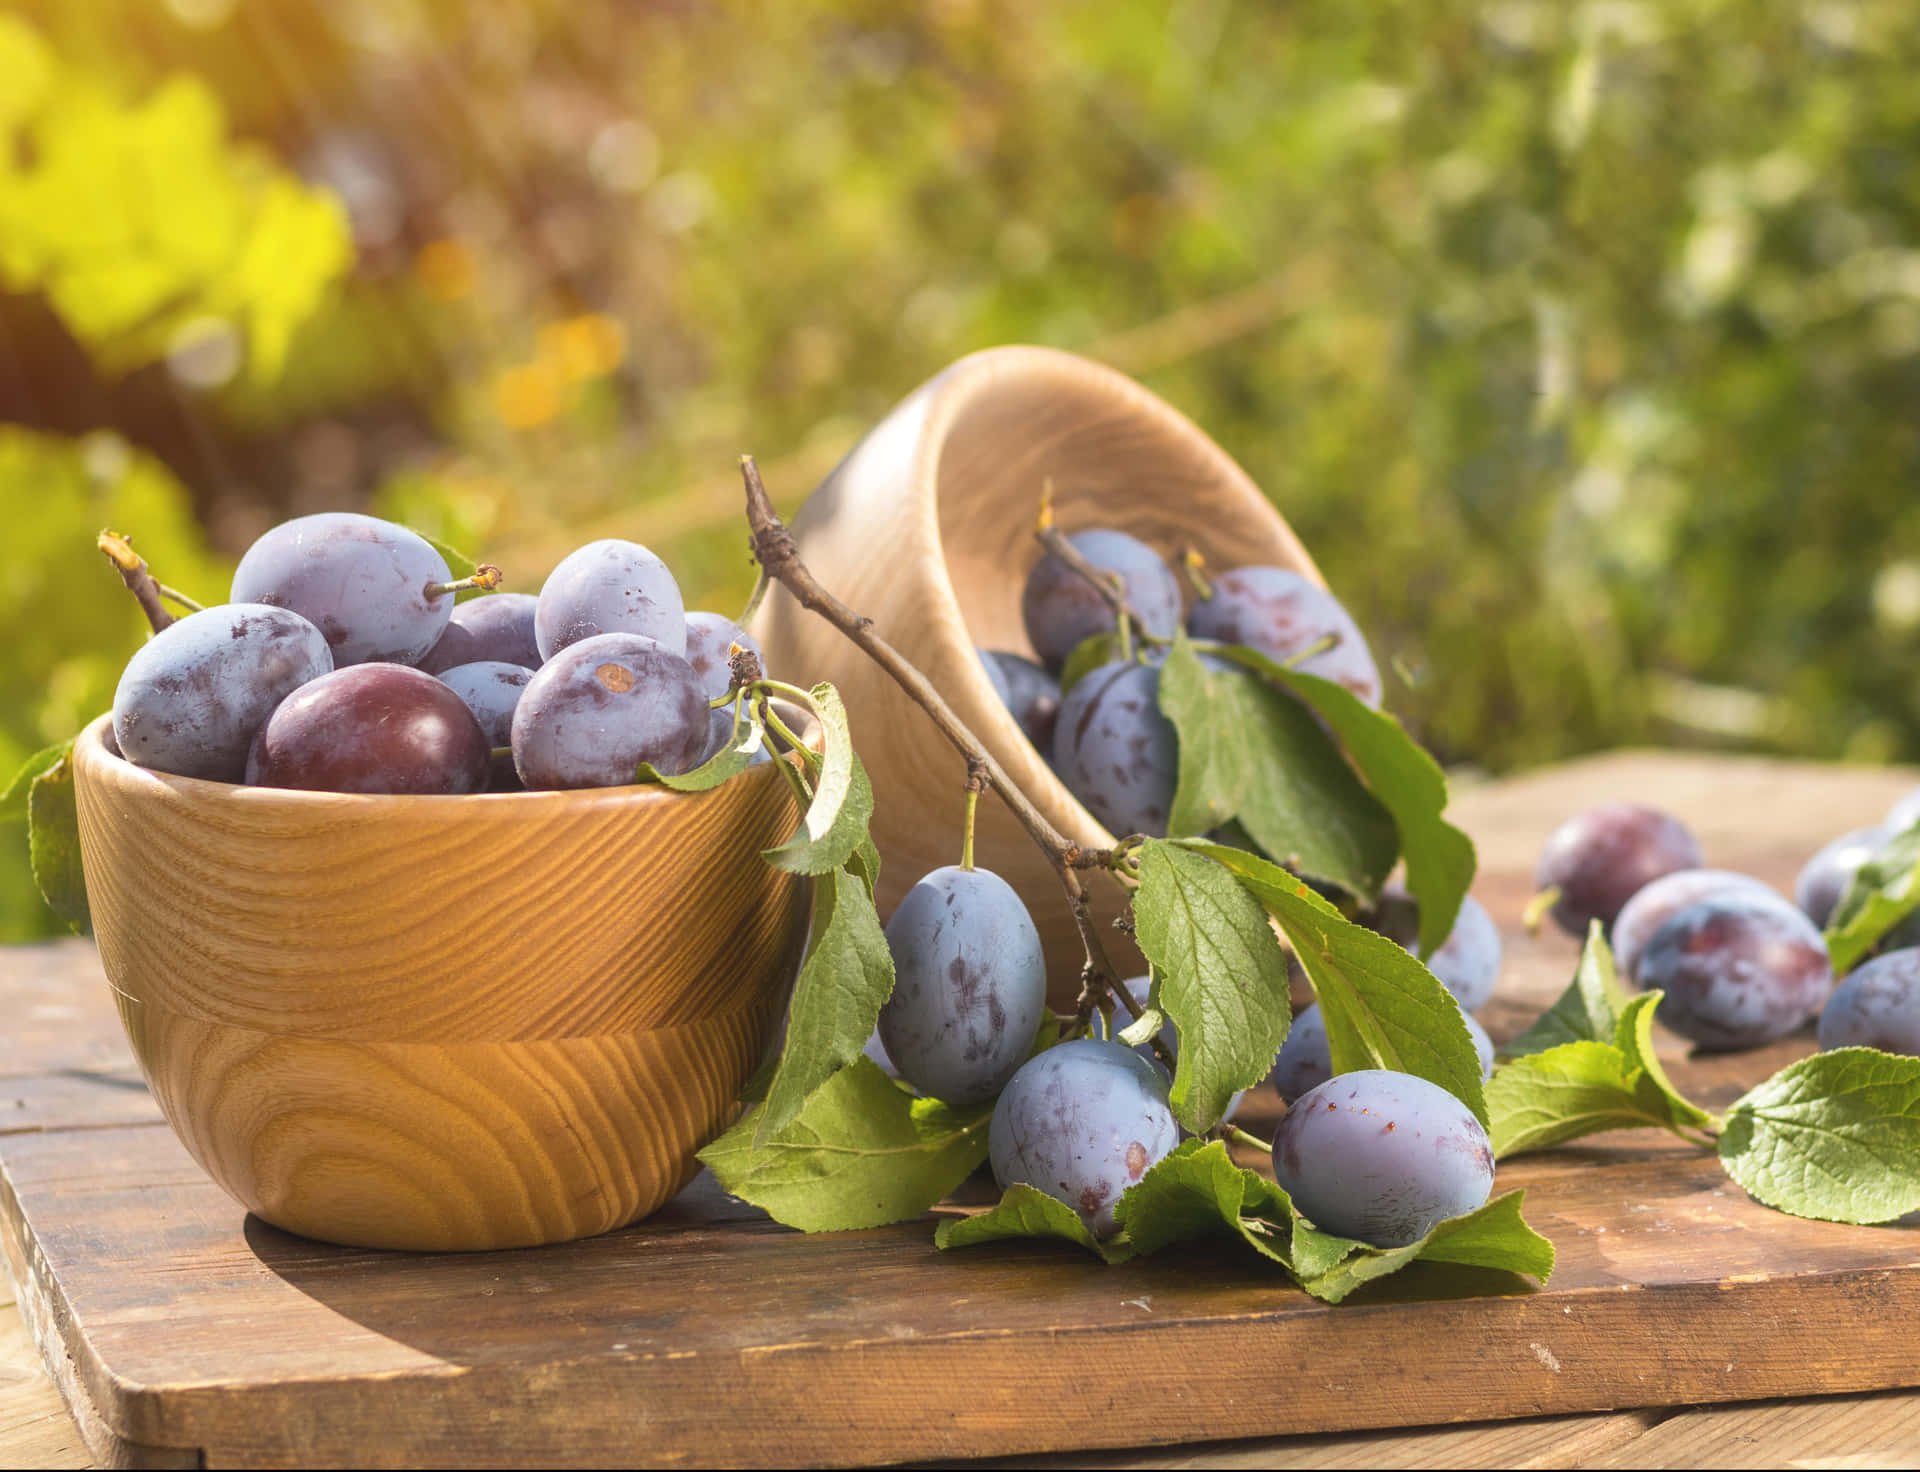 Download Two Bowls Of Damson Plums Wallpaper | Wallpapers.com